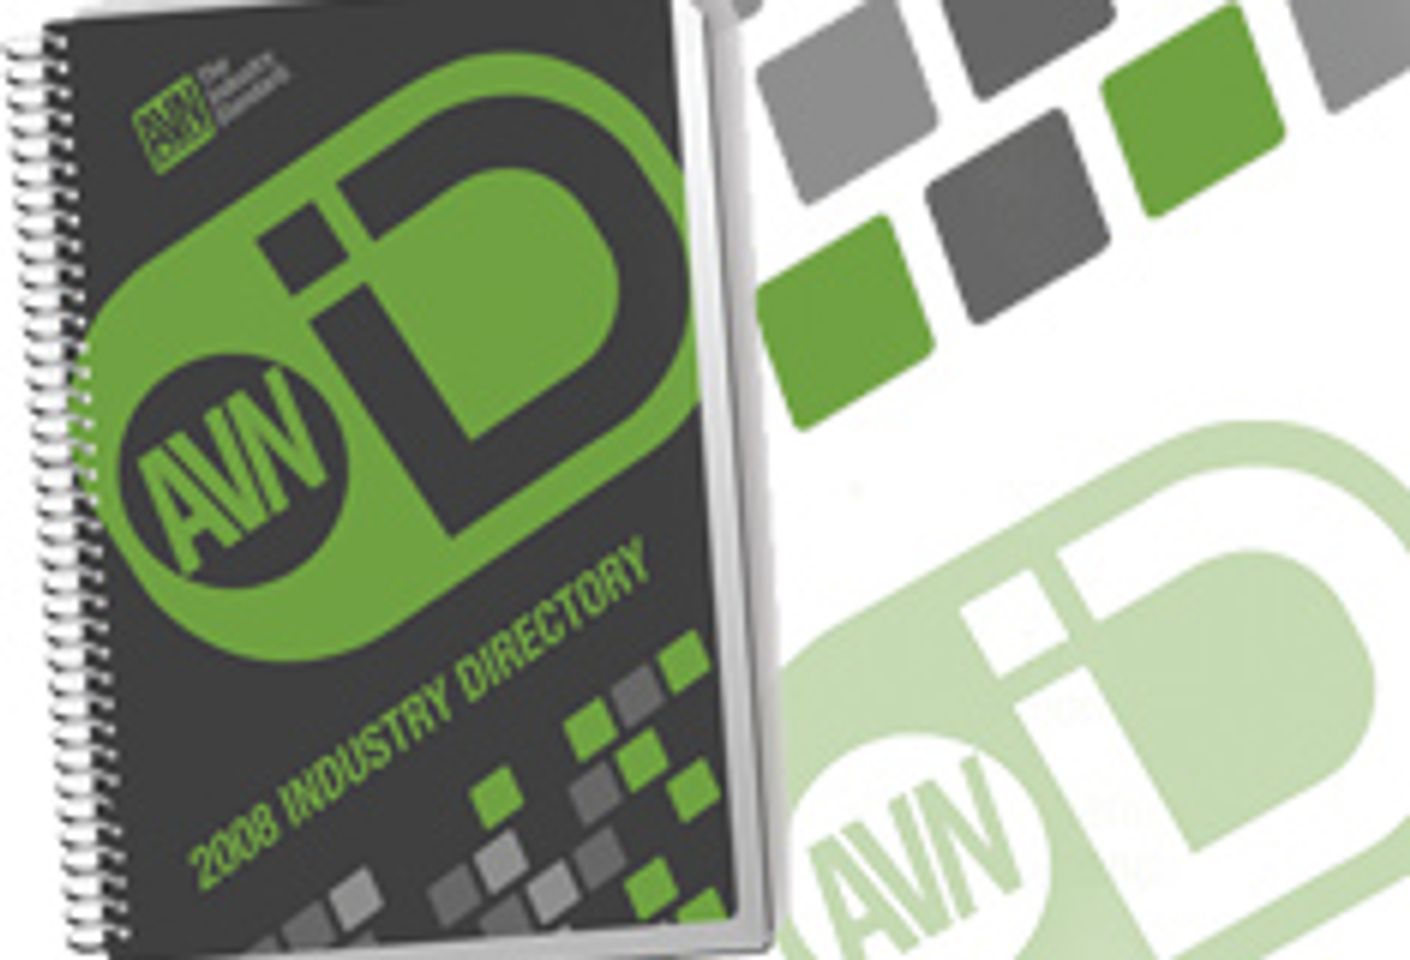 AVN Releases 2008 Industry Directory